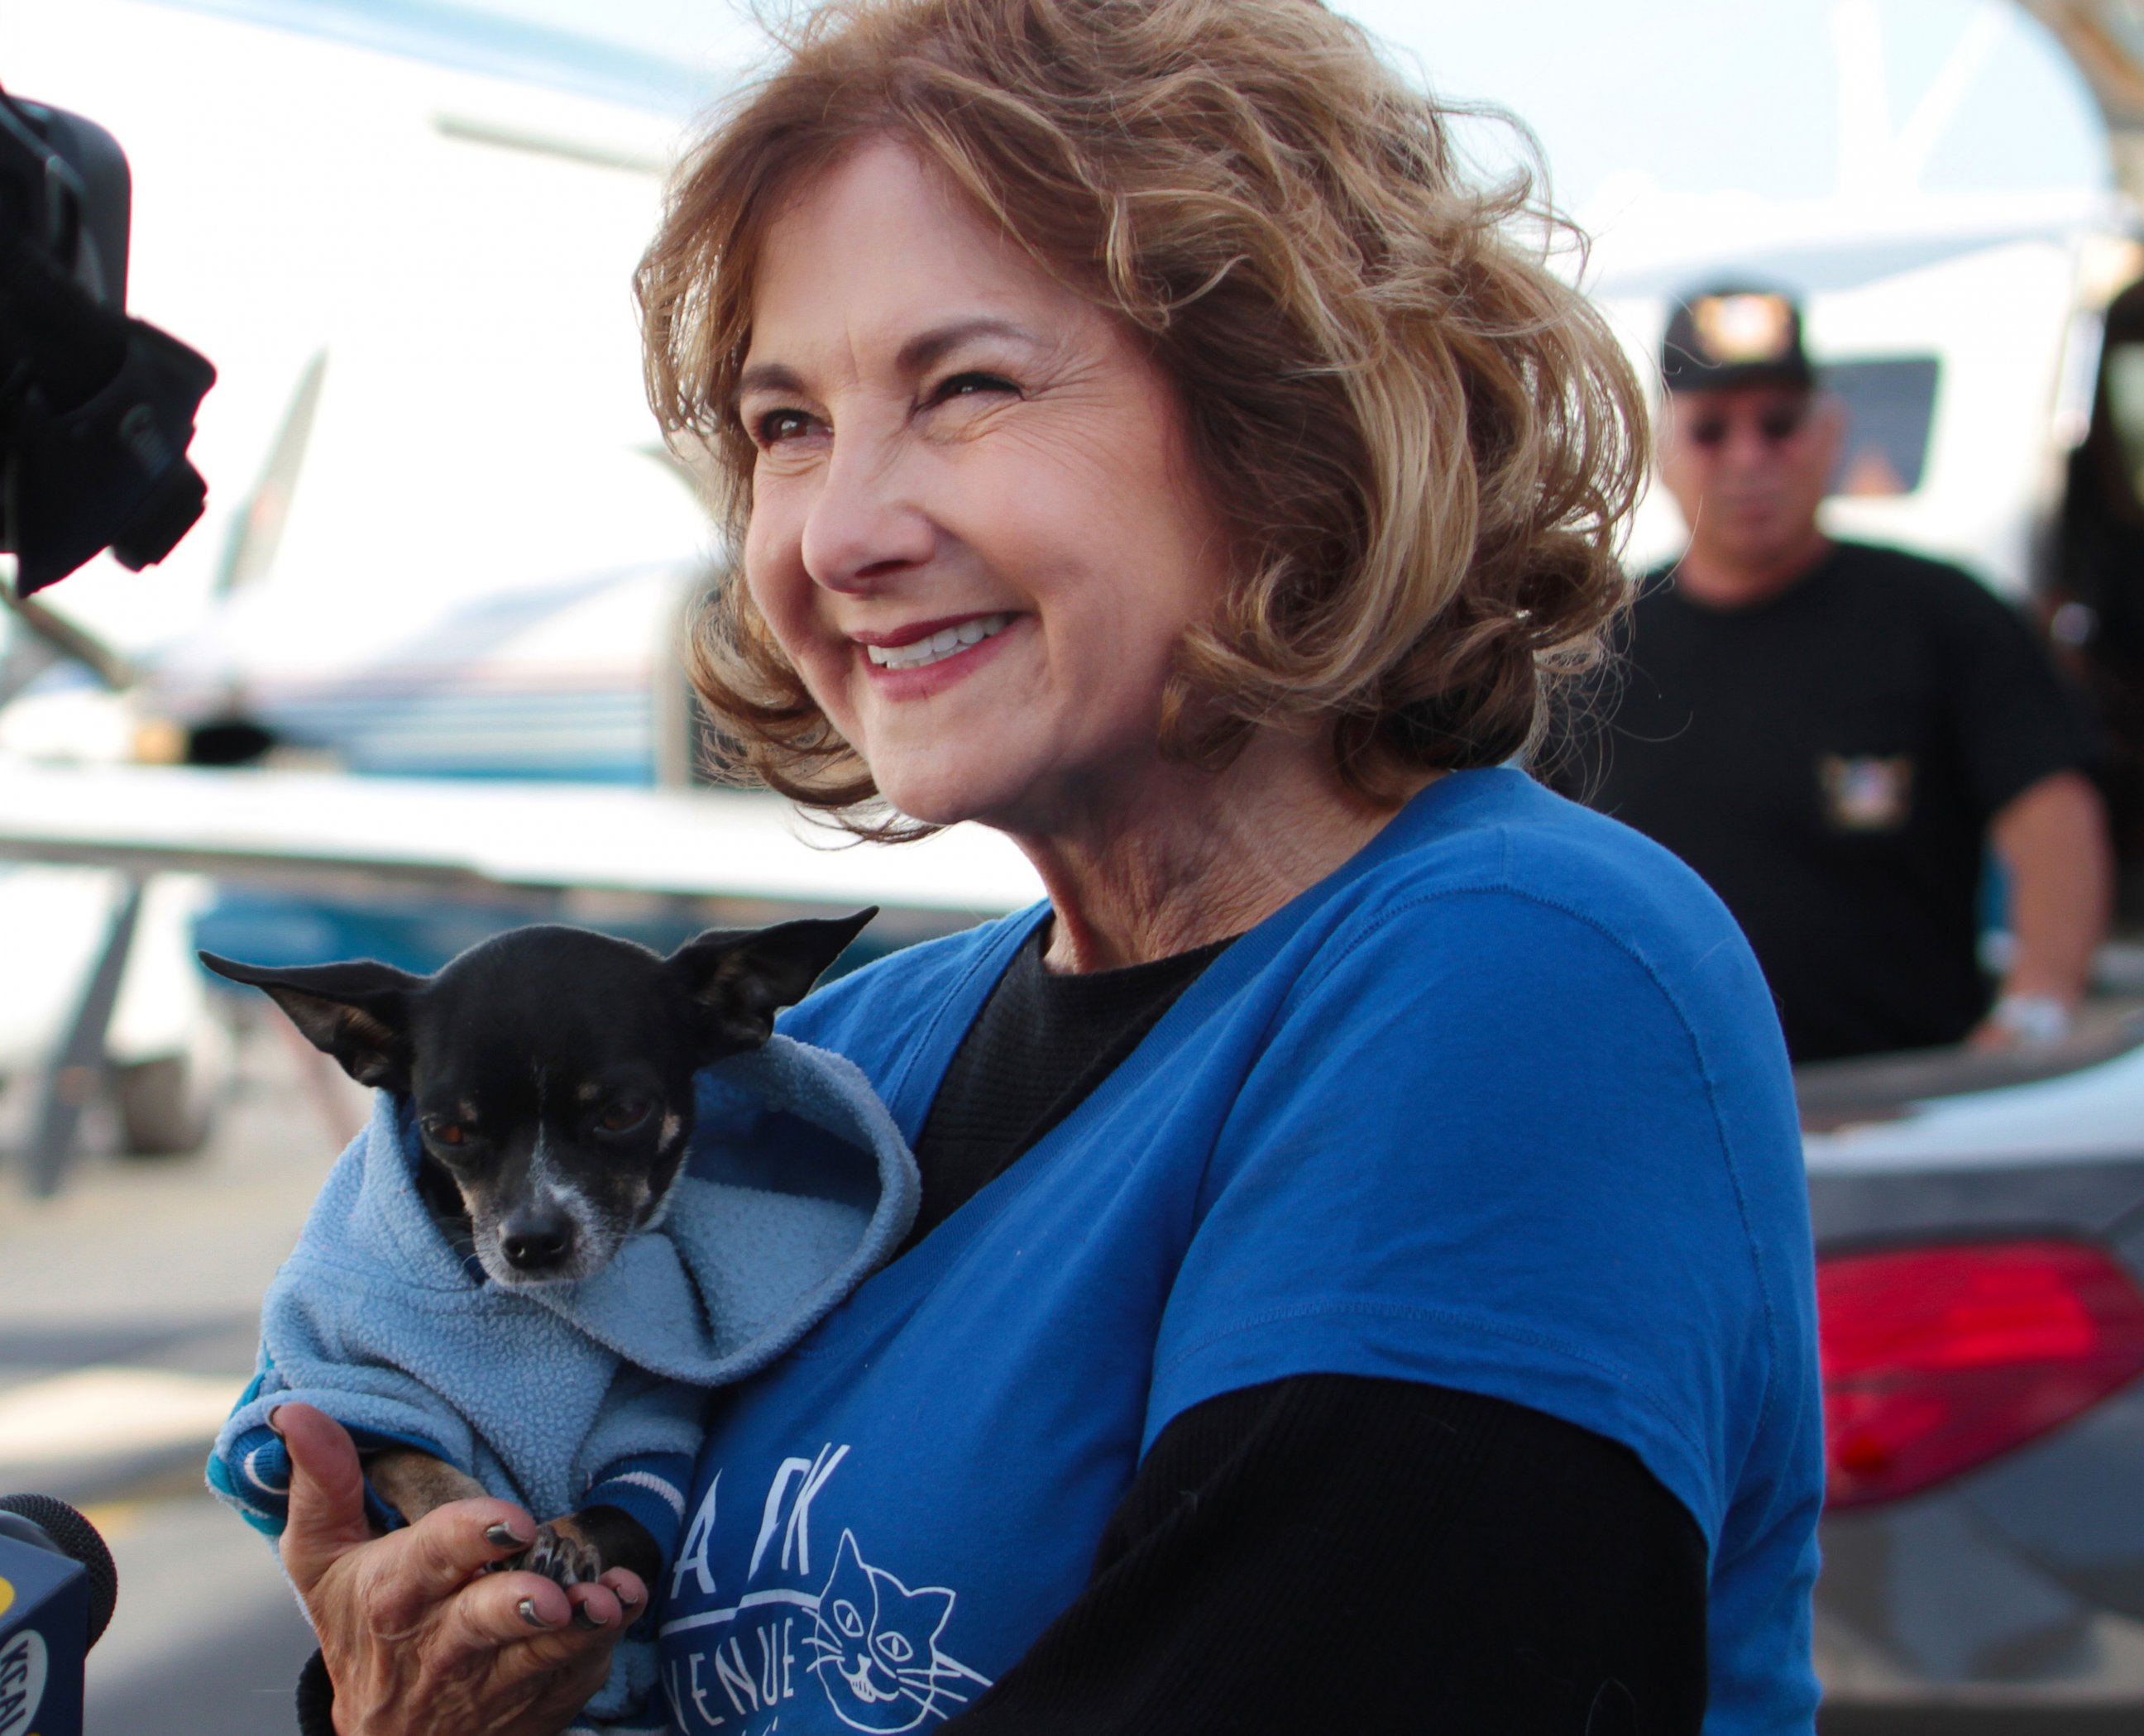 PHOTO: In this Nov. 22, 2014 photo provided courtesy of ShelterMe, volunteer Melanie Pozez loads rescued dogs into a Wings of Rescue plane to fly them to safe havens, at Van Nuys Airport, in Van Nuys, Calif.